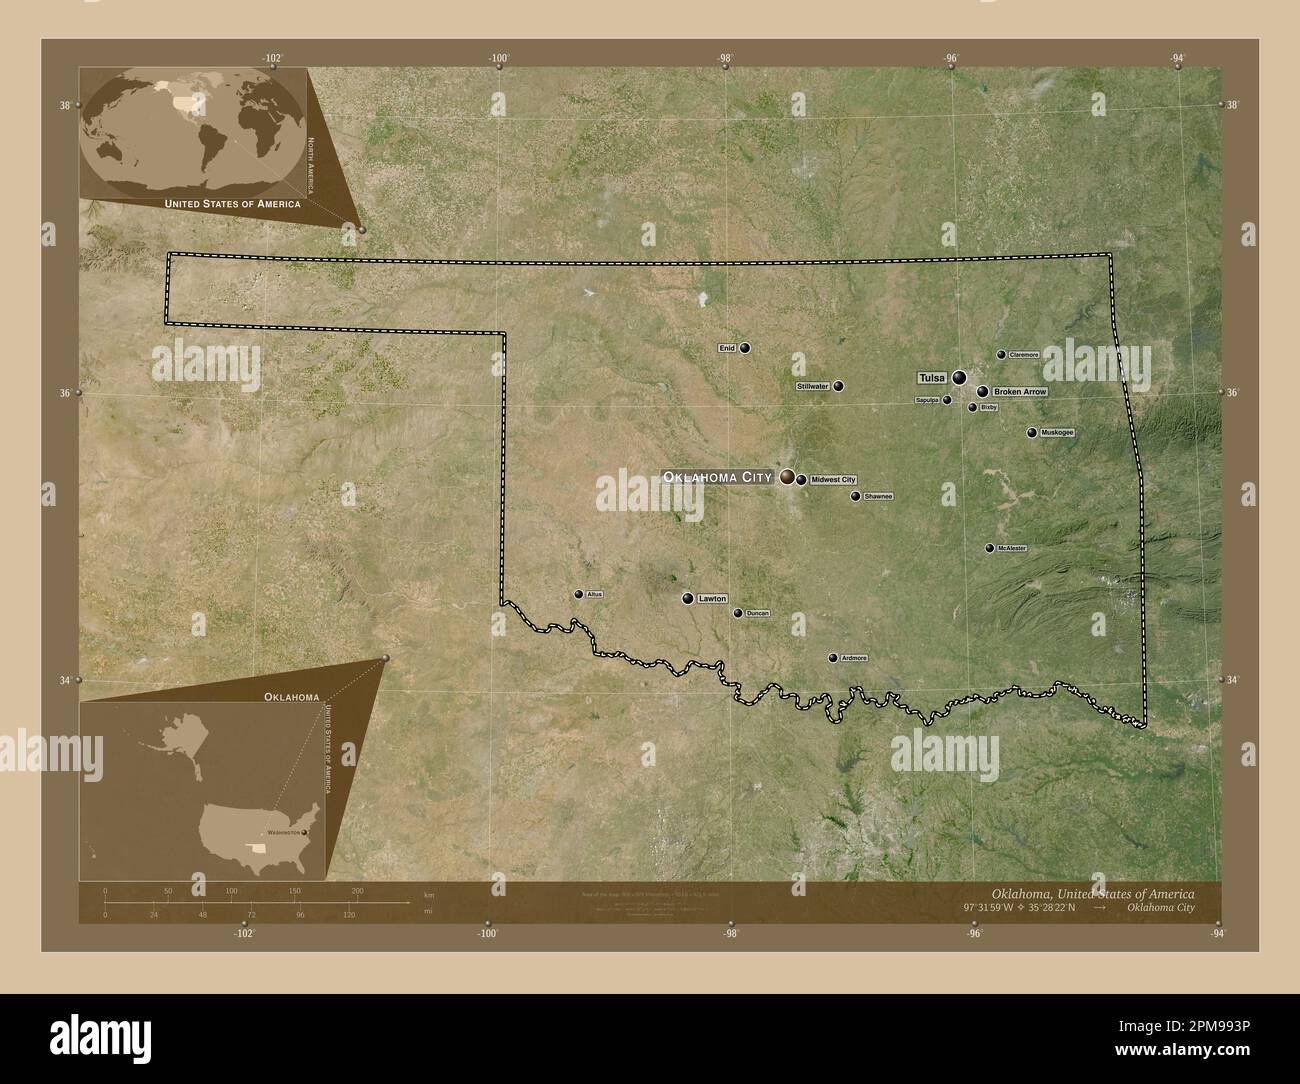 Oklahoma, state of United States of America. Low resolution satellite map. Locations and names of major cities of the region. Corner auxiliary locatio Stock Photo